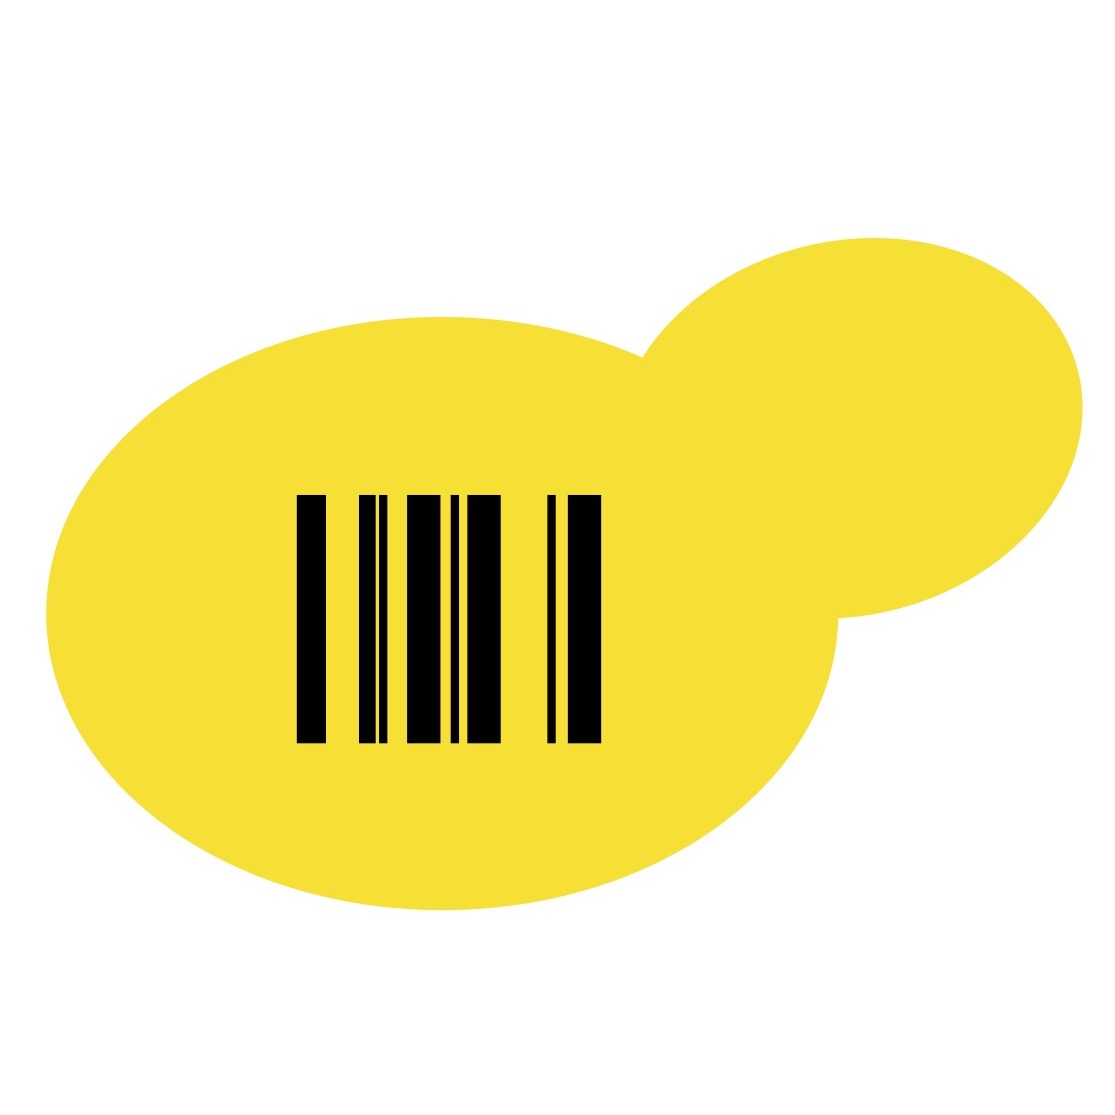 Barcoded Yeast